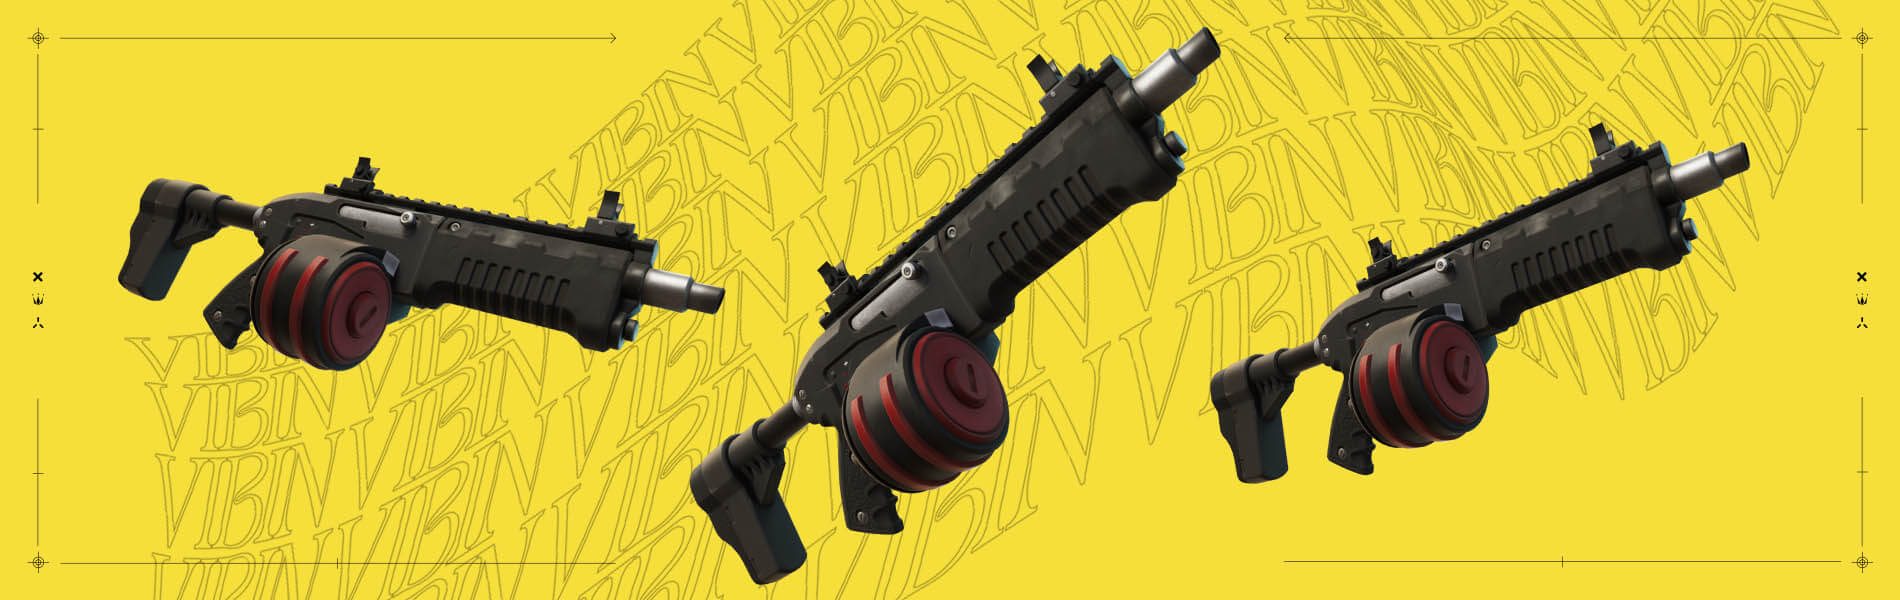 Patch Notes for Fortnite v21.20 - Charge SMG, Shuffled Shrines POI, Port-A-Fort and more